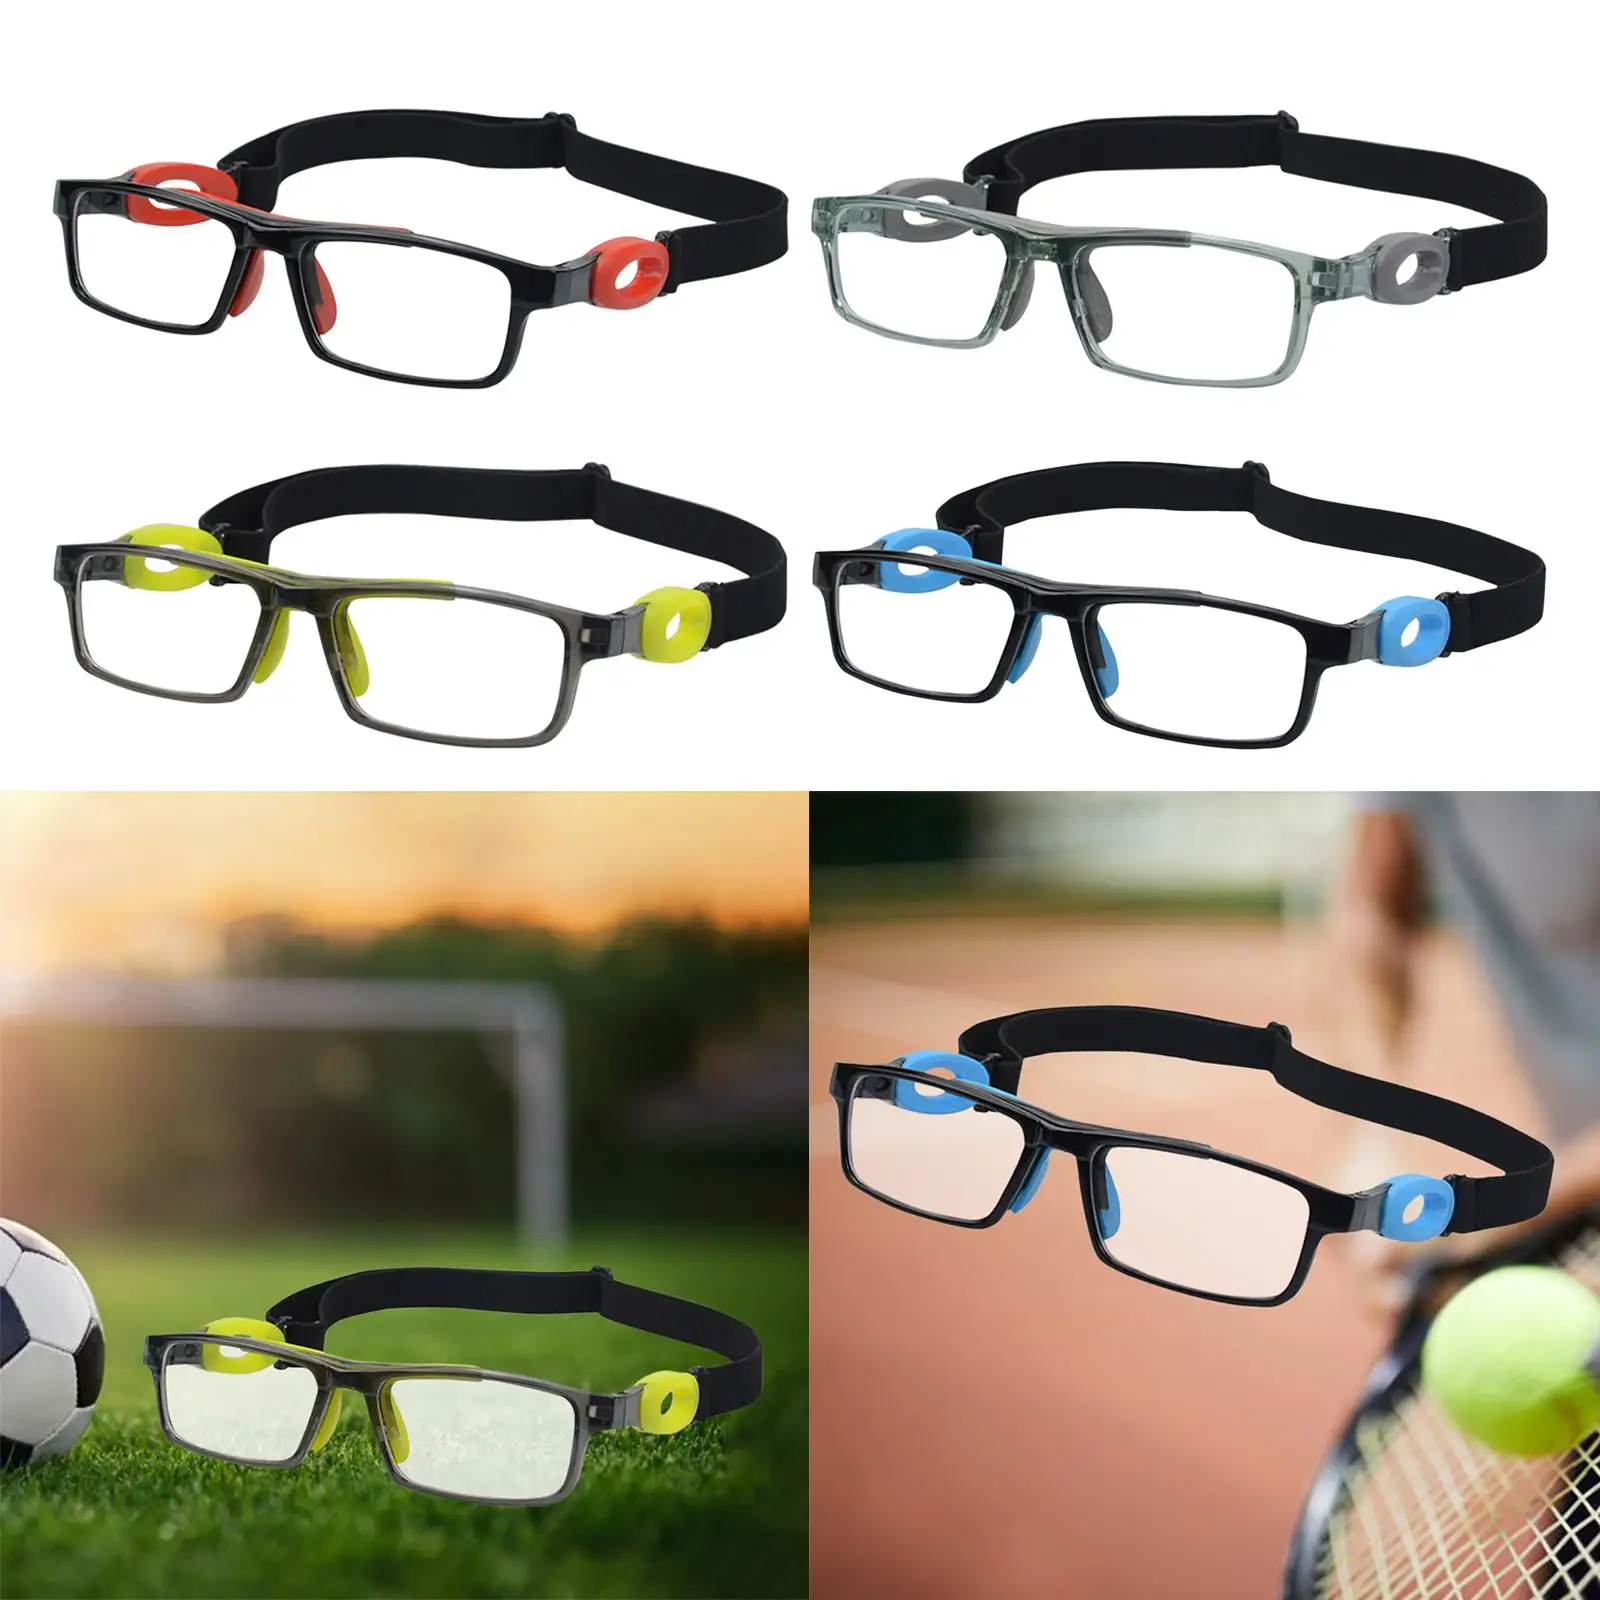 Professional Basketball Glasses Wearable AntiFog Lightweight Protective Glasses Sports Goggles for Soccer Tennis Cycling